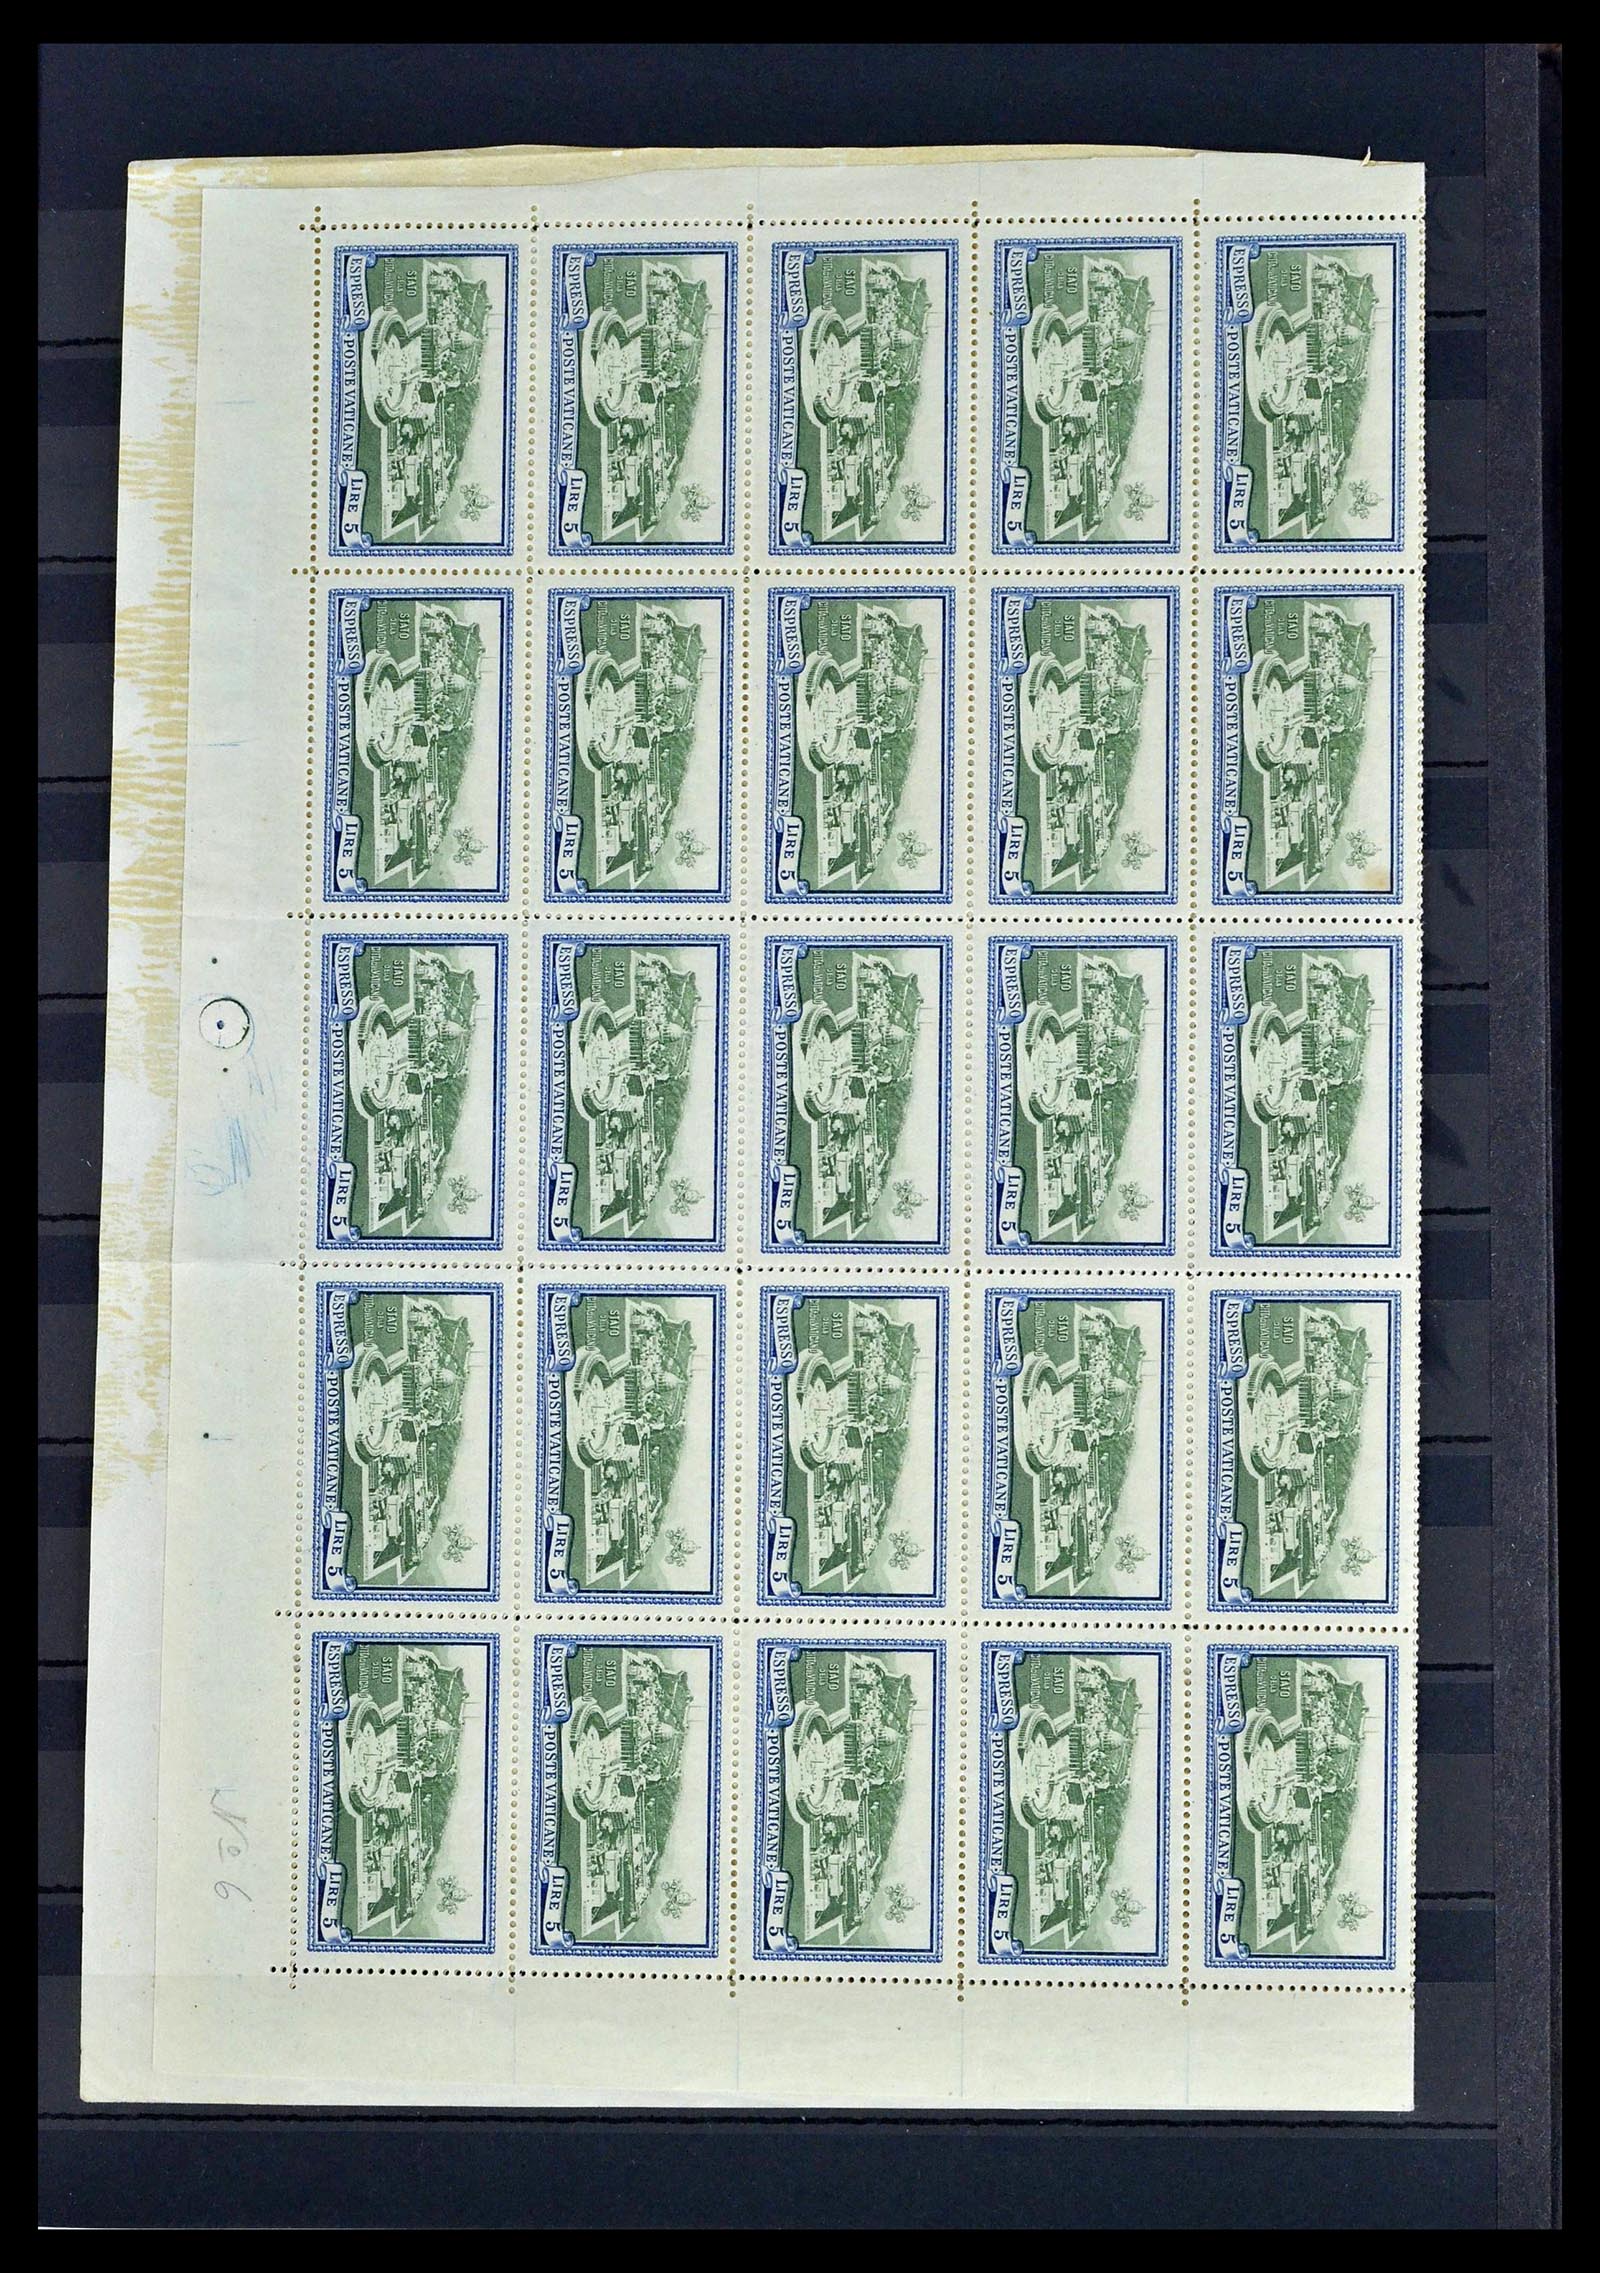 39236 0033 - Stamp collection 39236 European countries 40s-60s.